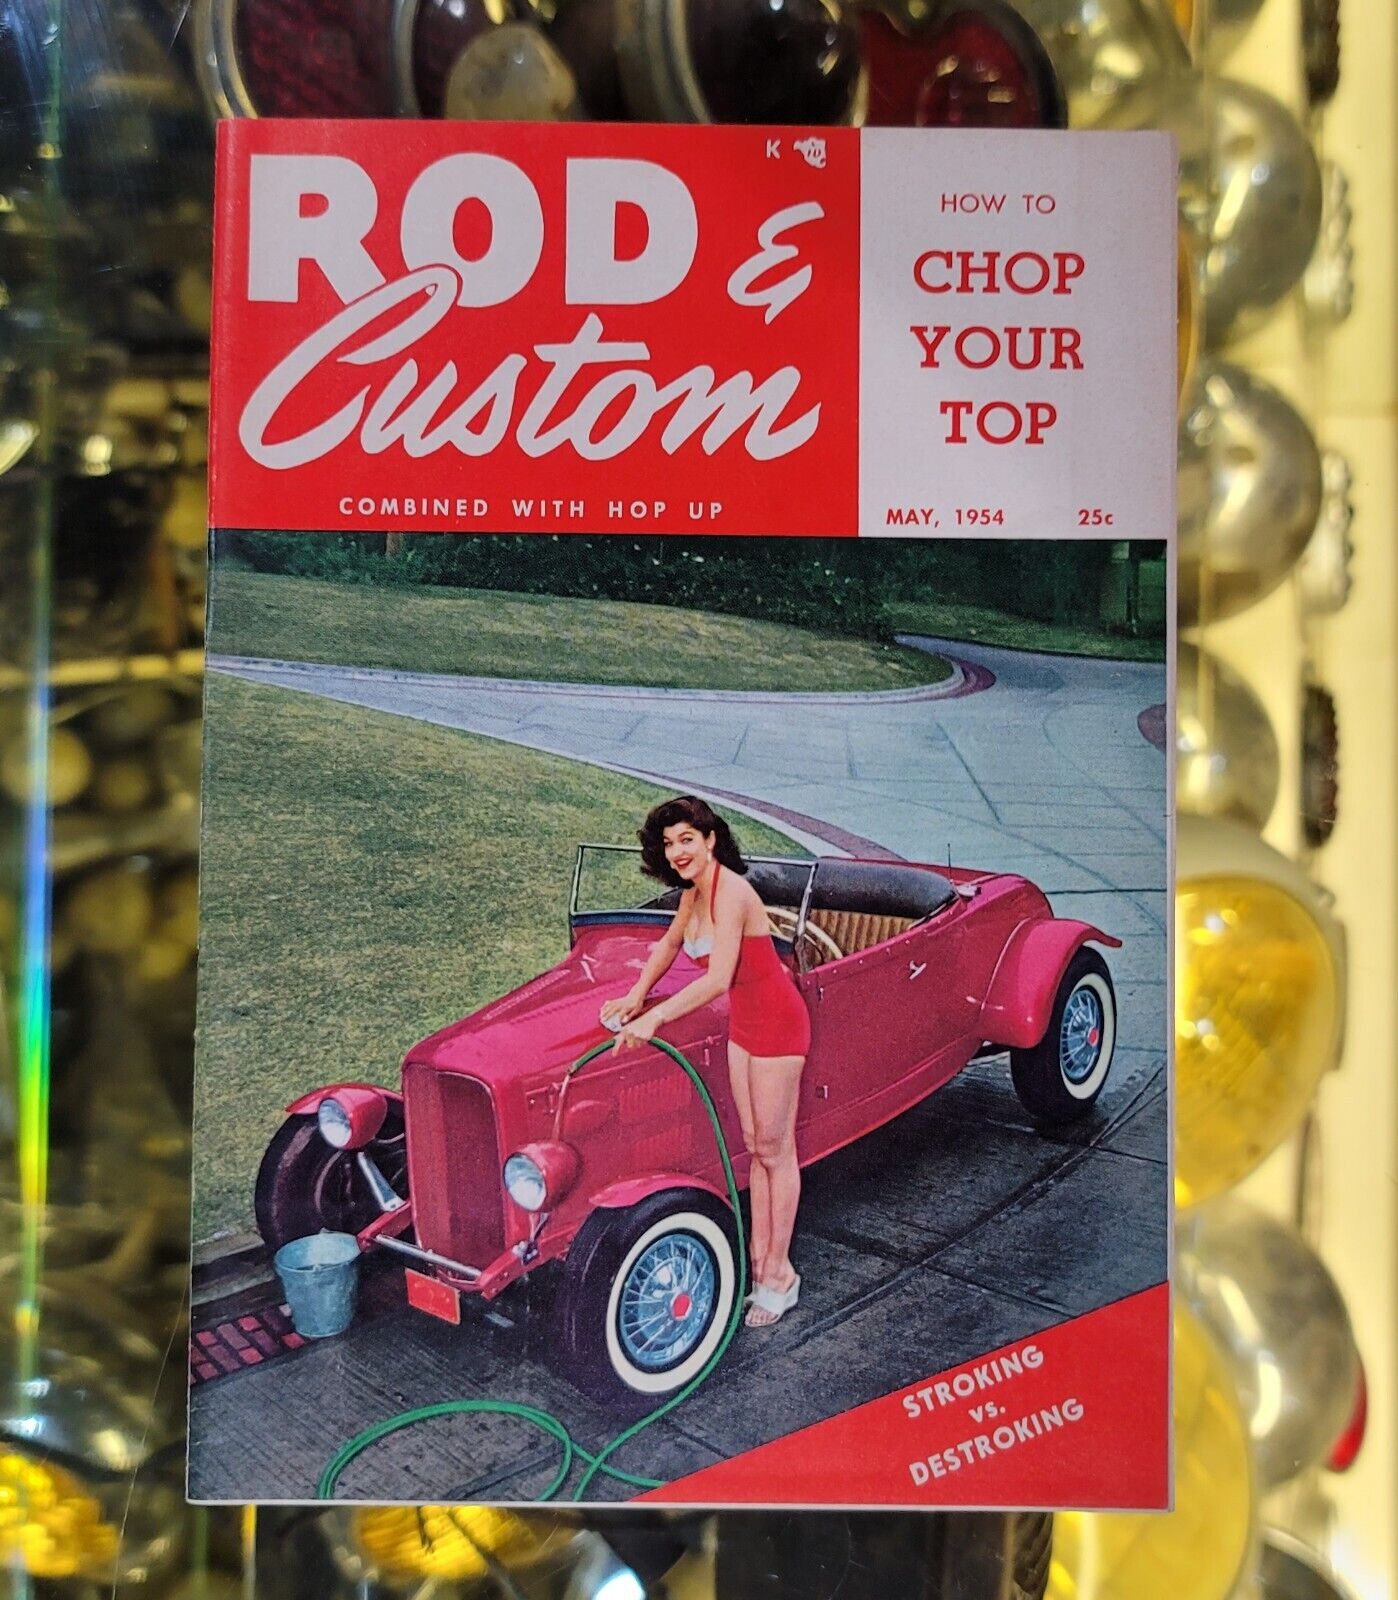 Hot ROD & CUSTOM Cars 1954 Blackie Gejeian T roadster 1939 Ford How to CHOP TOPs